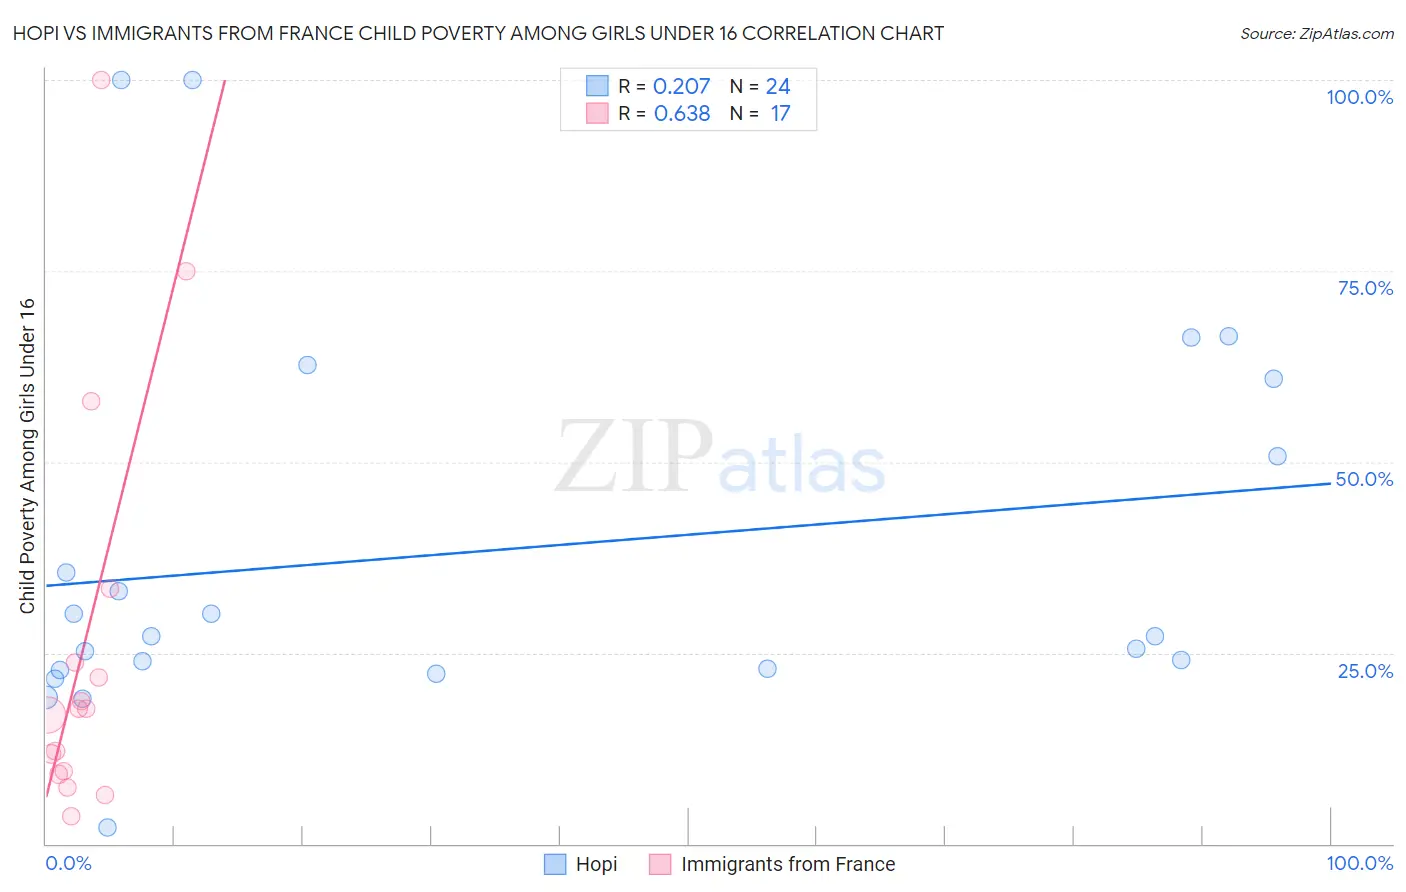 Hopi vs Immigrants from France Child Poverty Among Girls Under 16